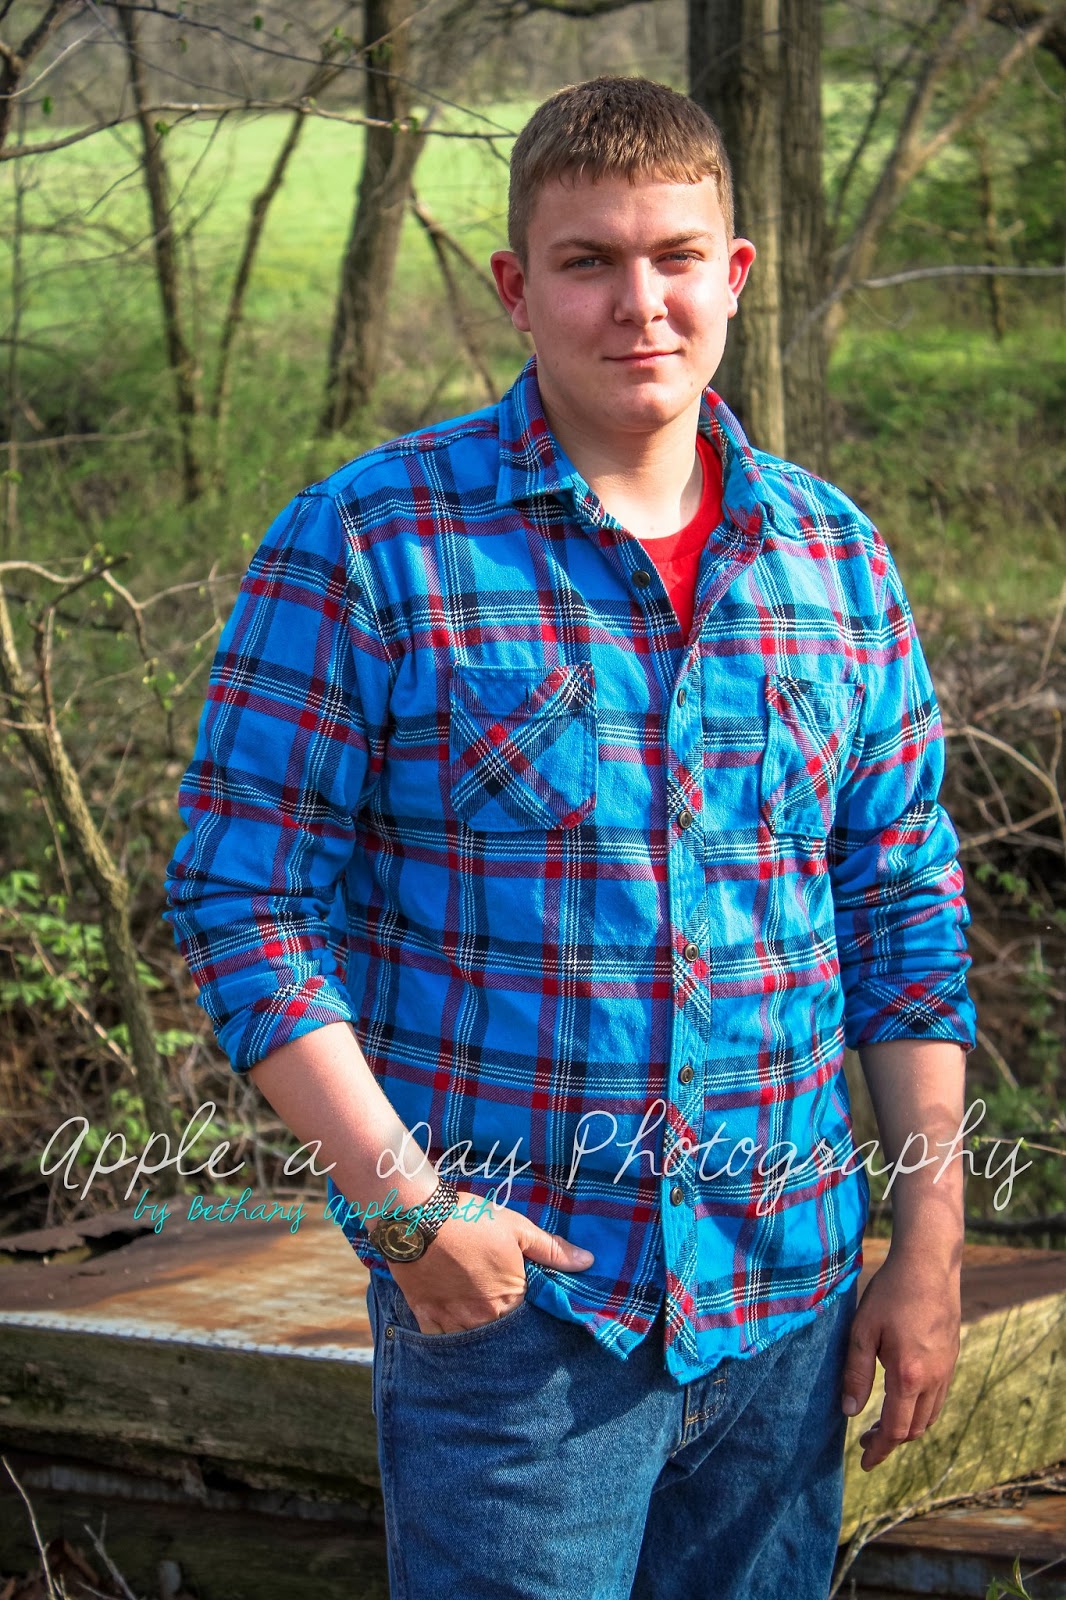 Apple A Day Photography: Senior Pictures